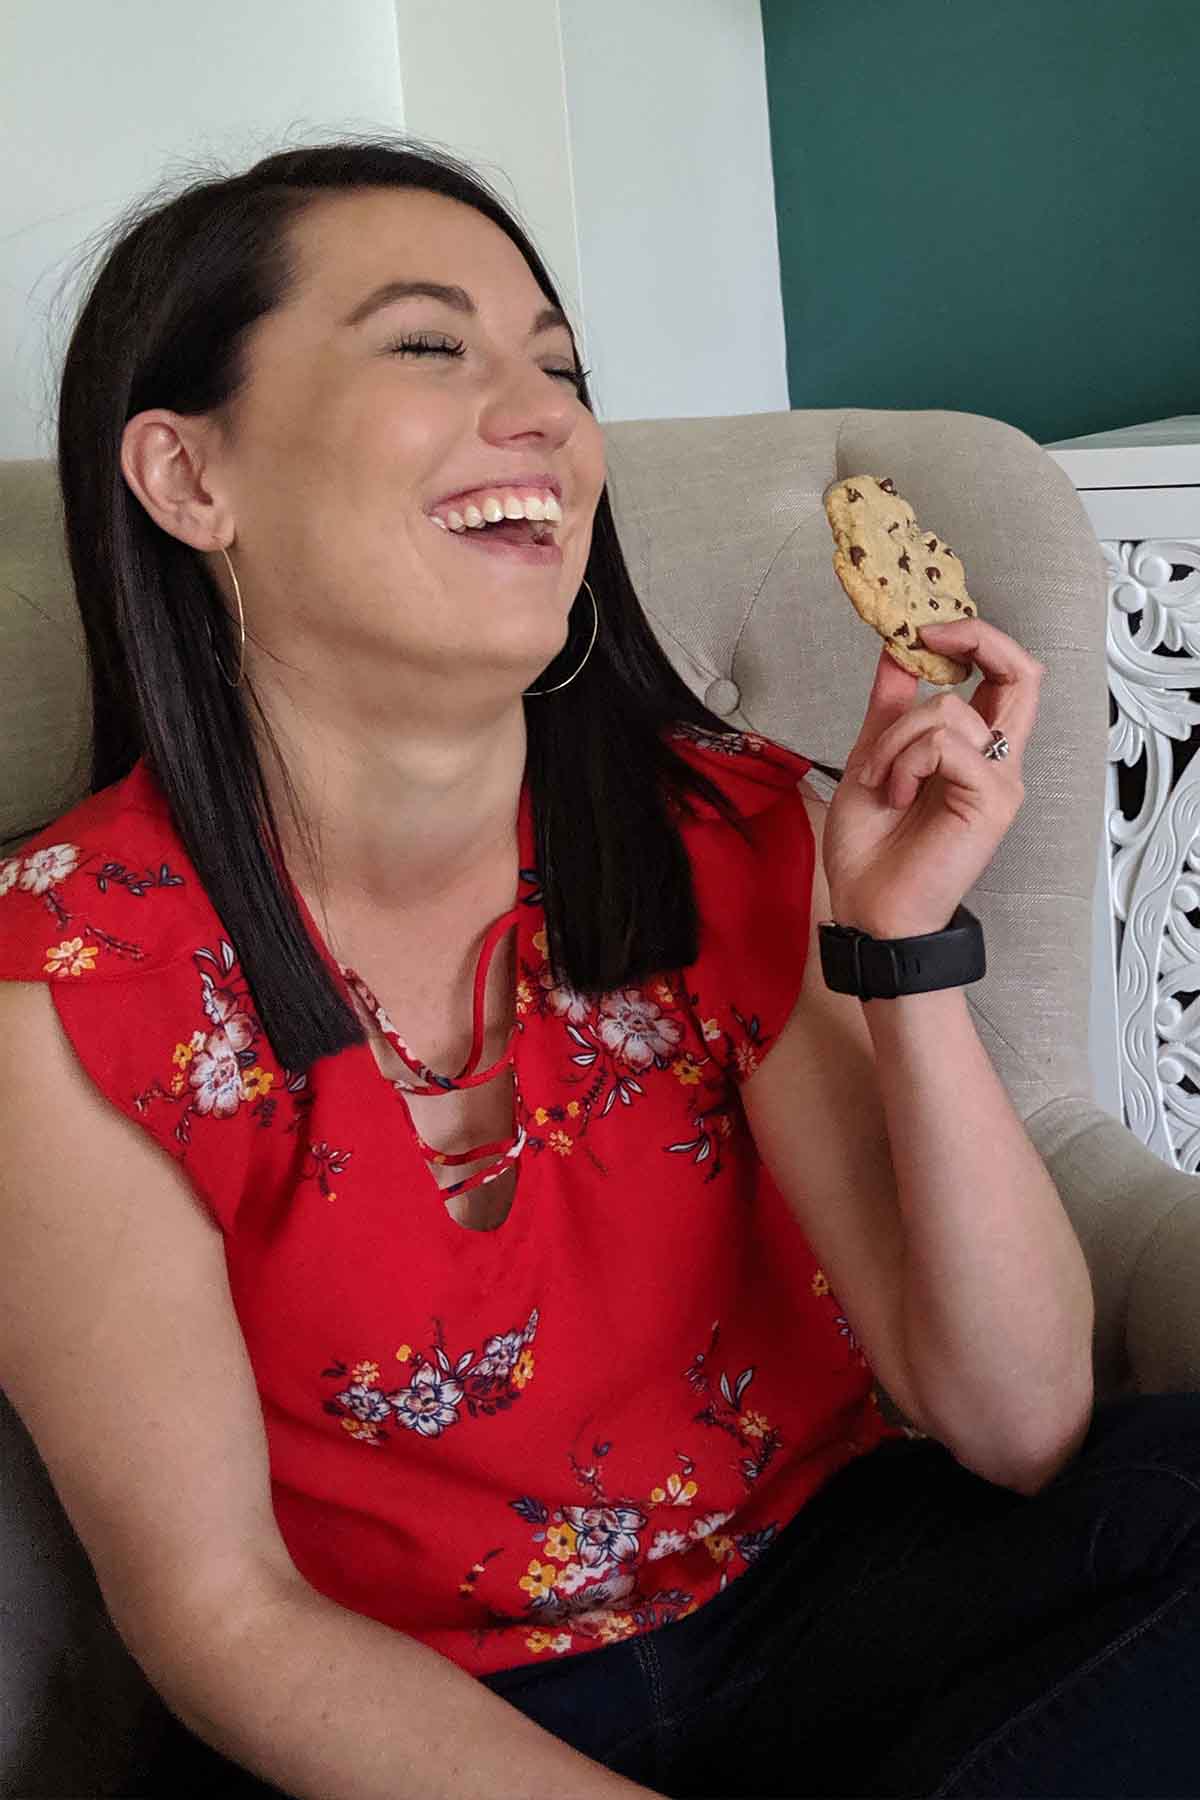 girl laughing with a cookie in hand.